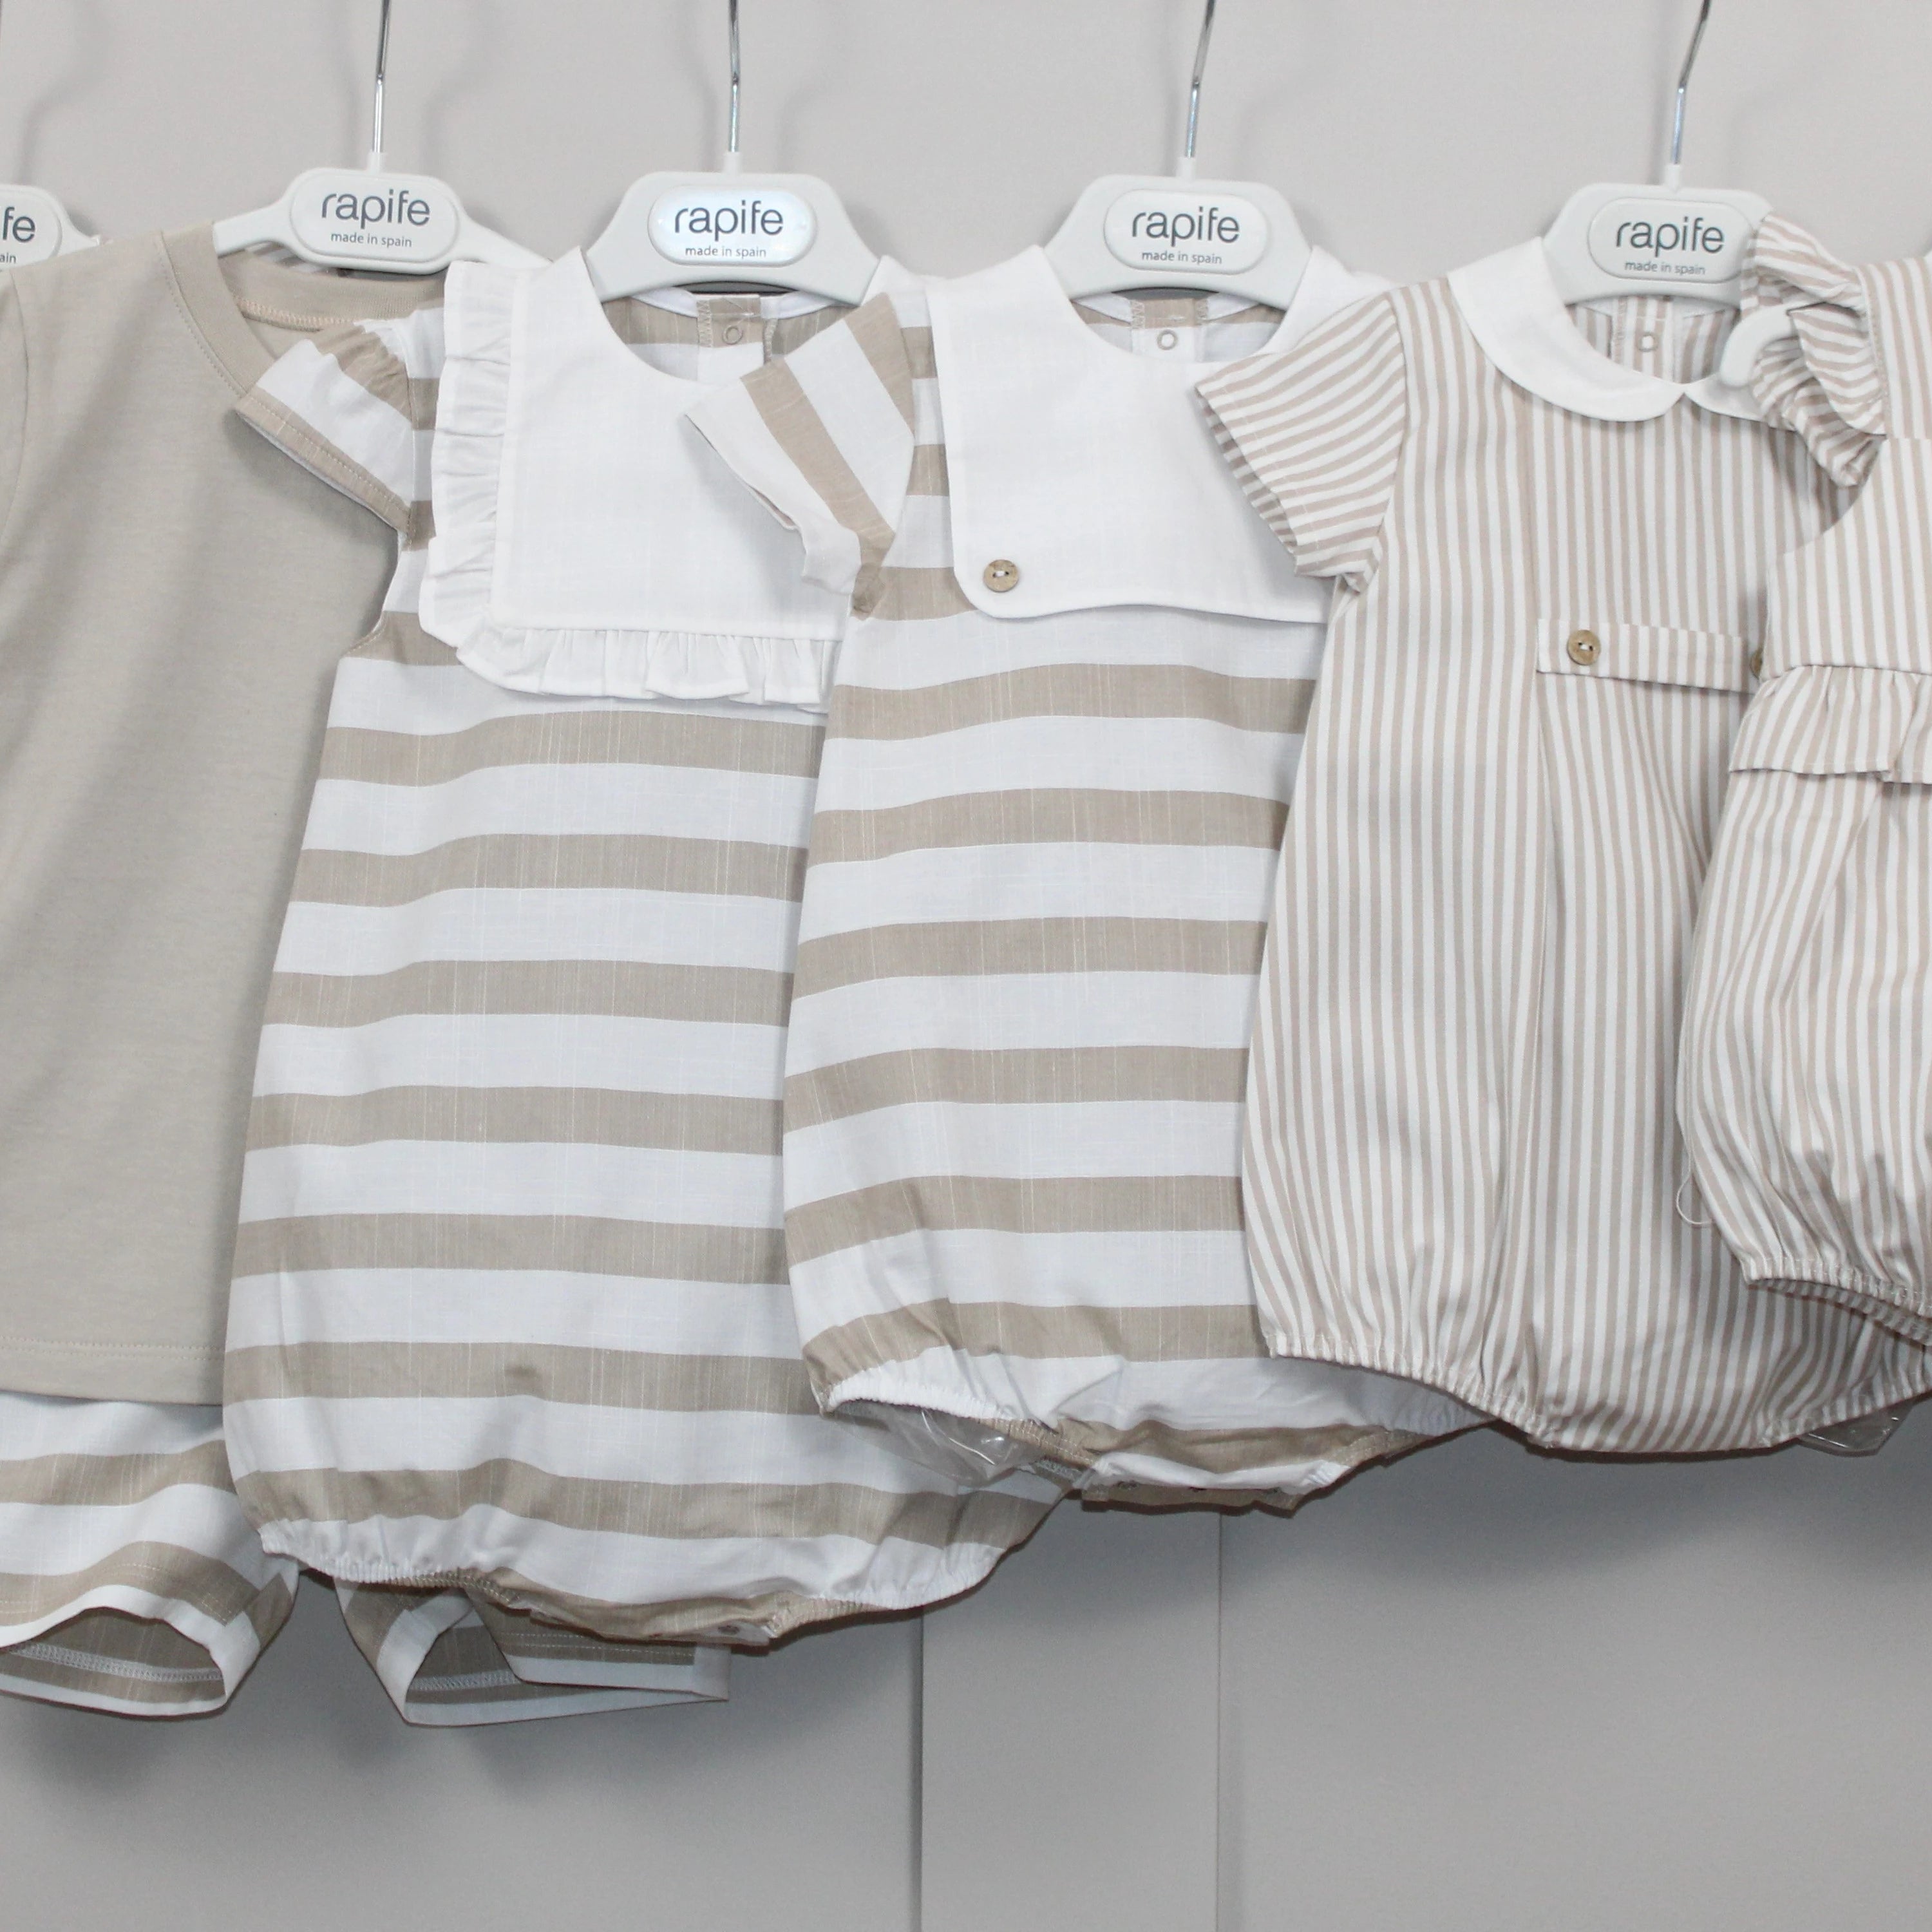 rapife camel stripe summer collections